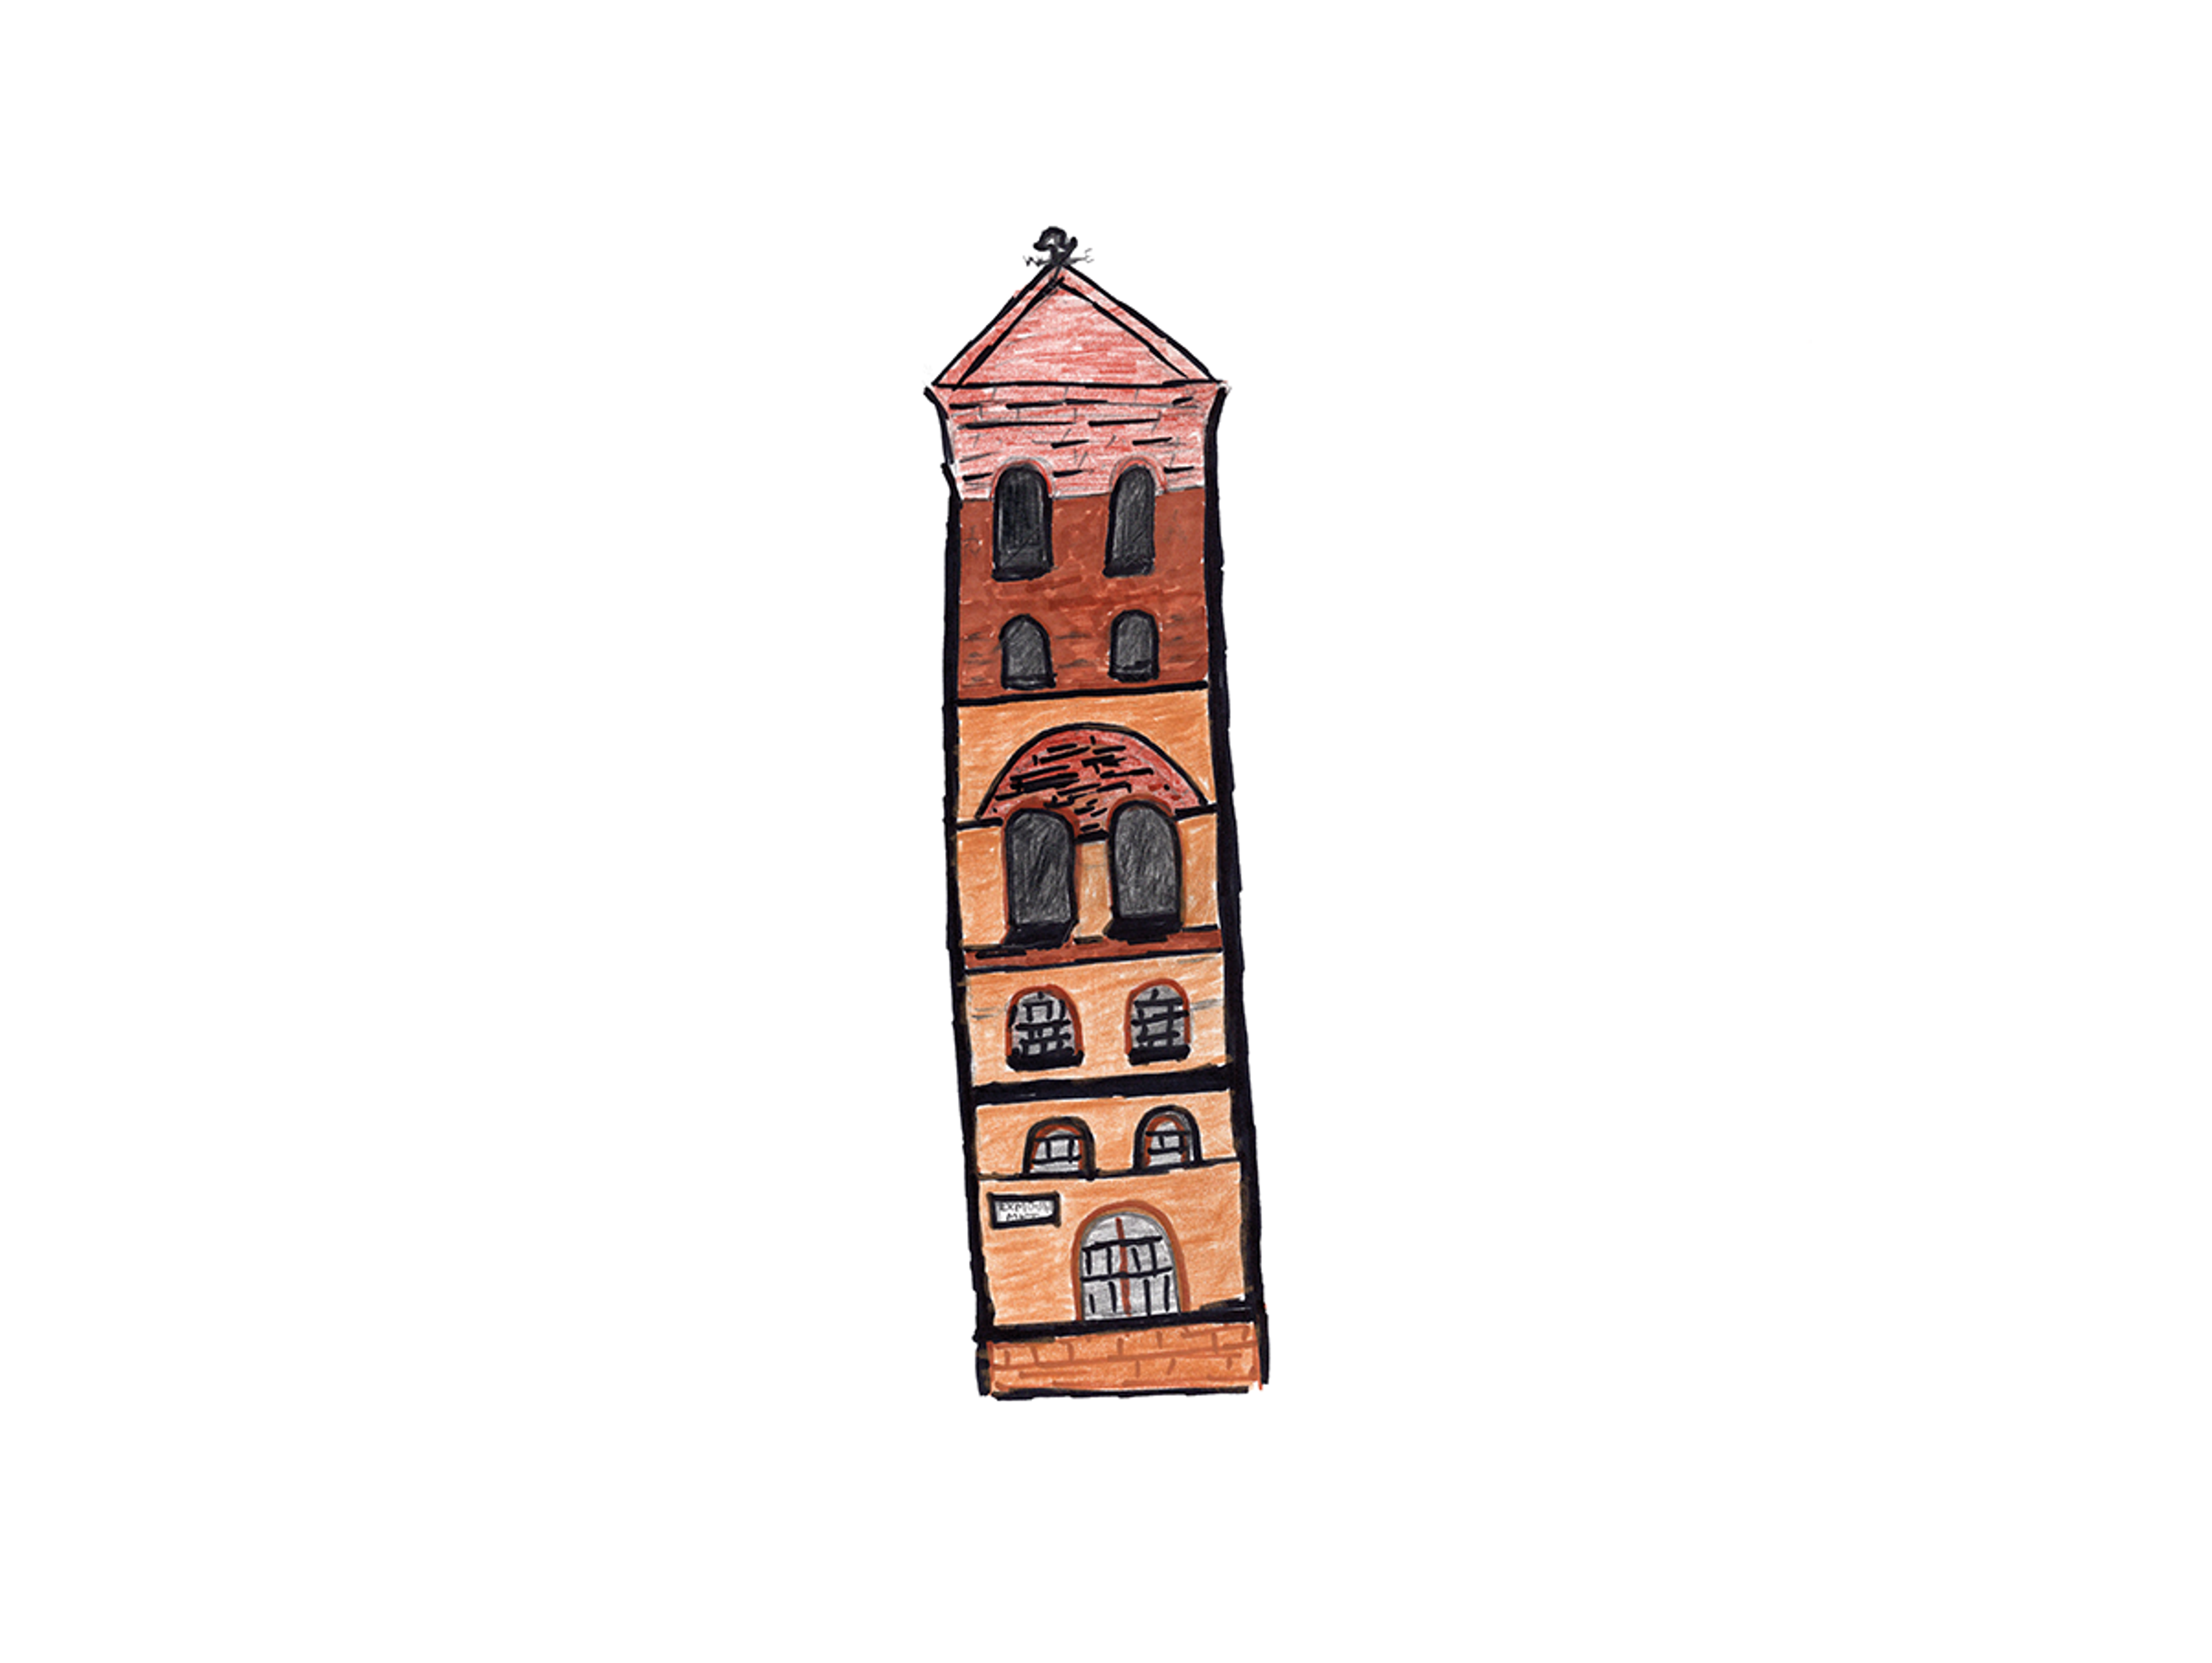 Illustration of a tall tower